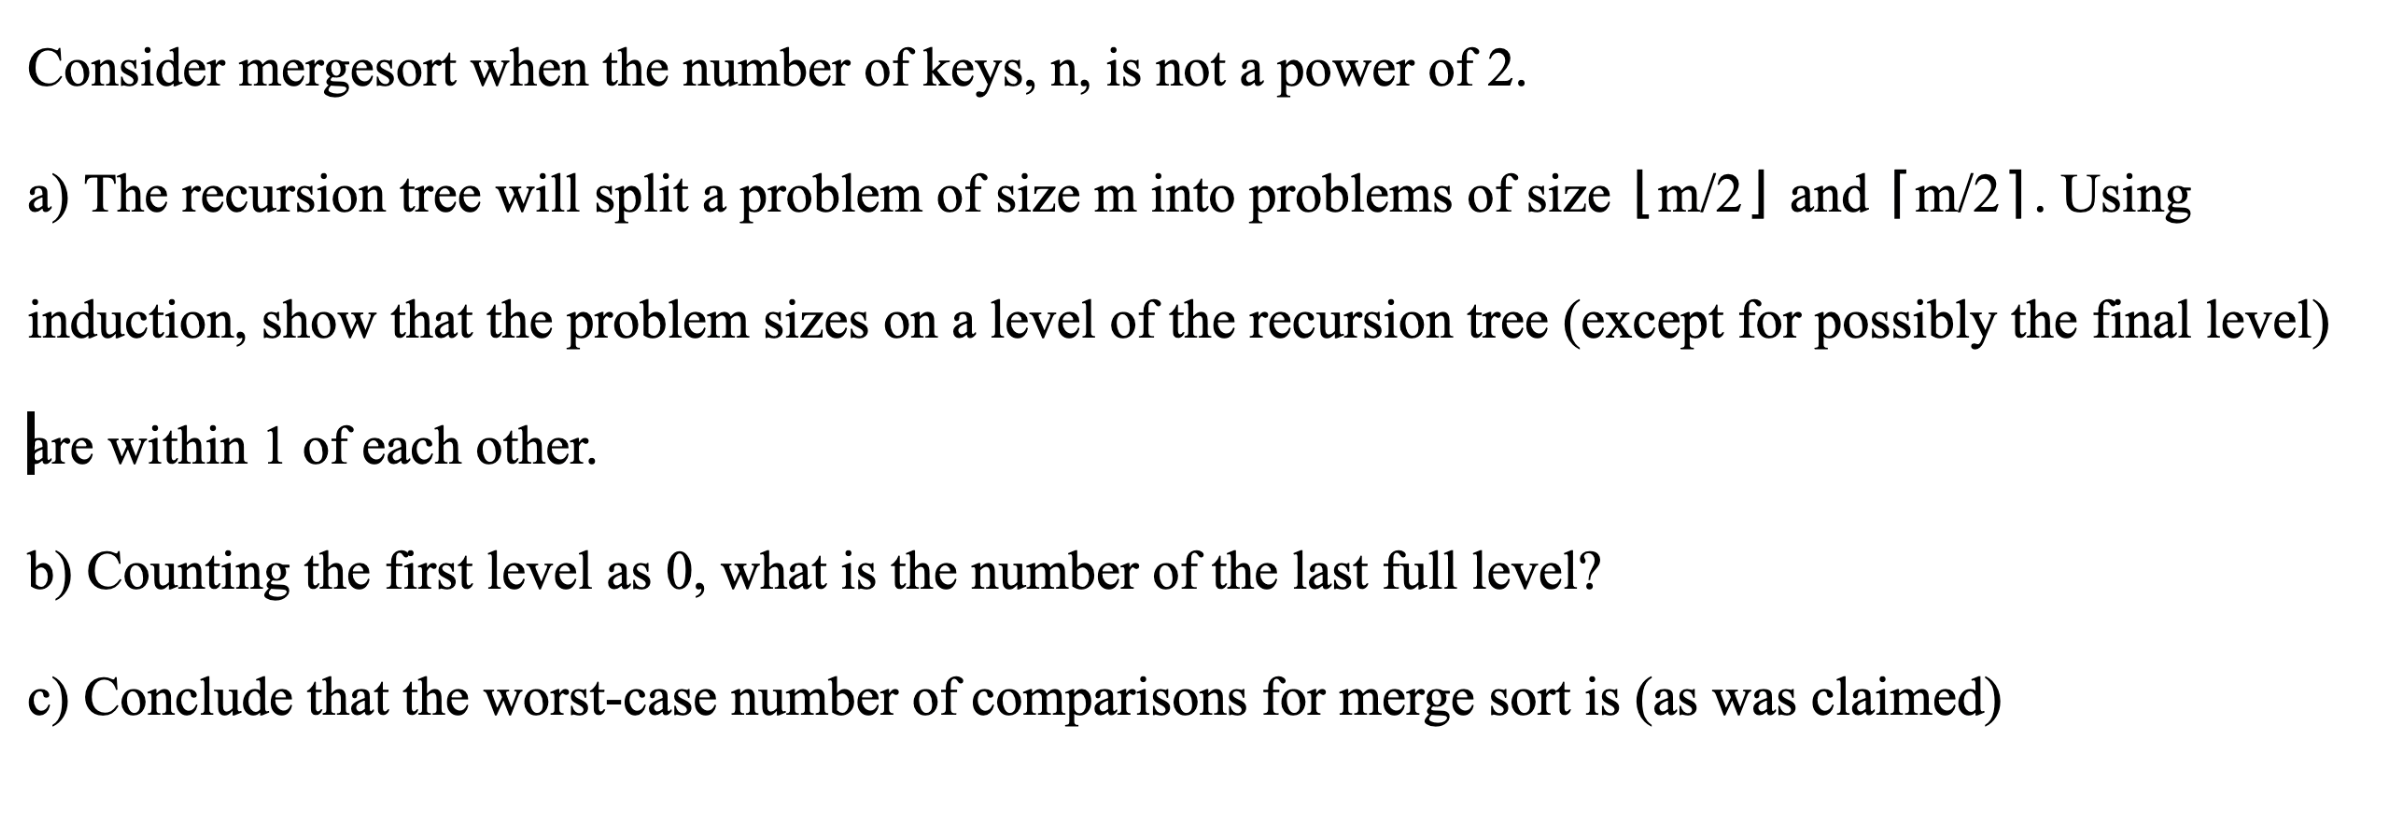 Consider mergesort when the number of keys, n, is not a power of 2. a) The recursion tree will split a